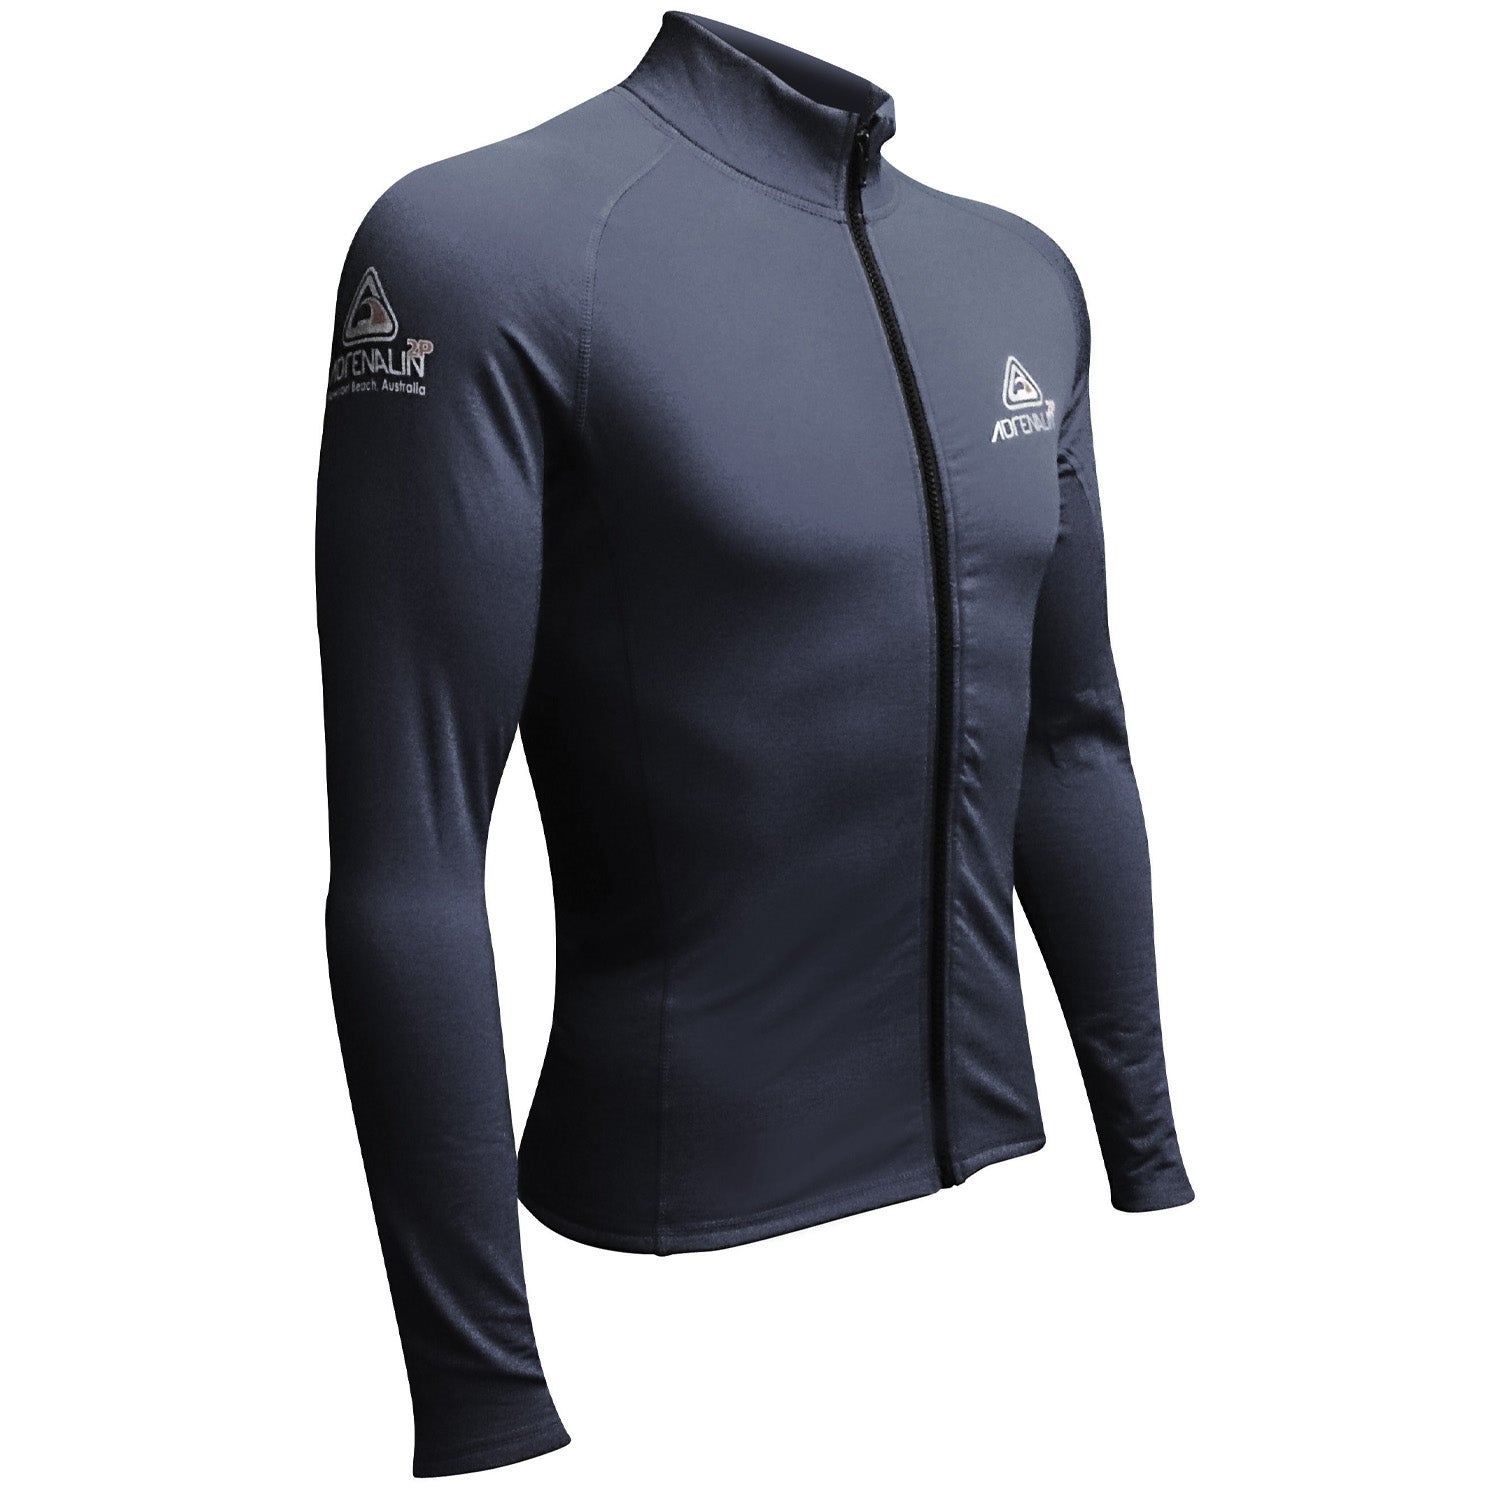 Adrenaline 2P Thermo Shield Long Sleeve Zipped Top